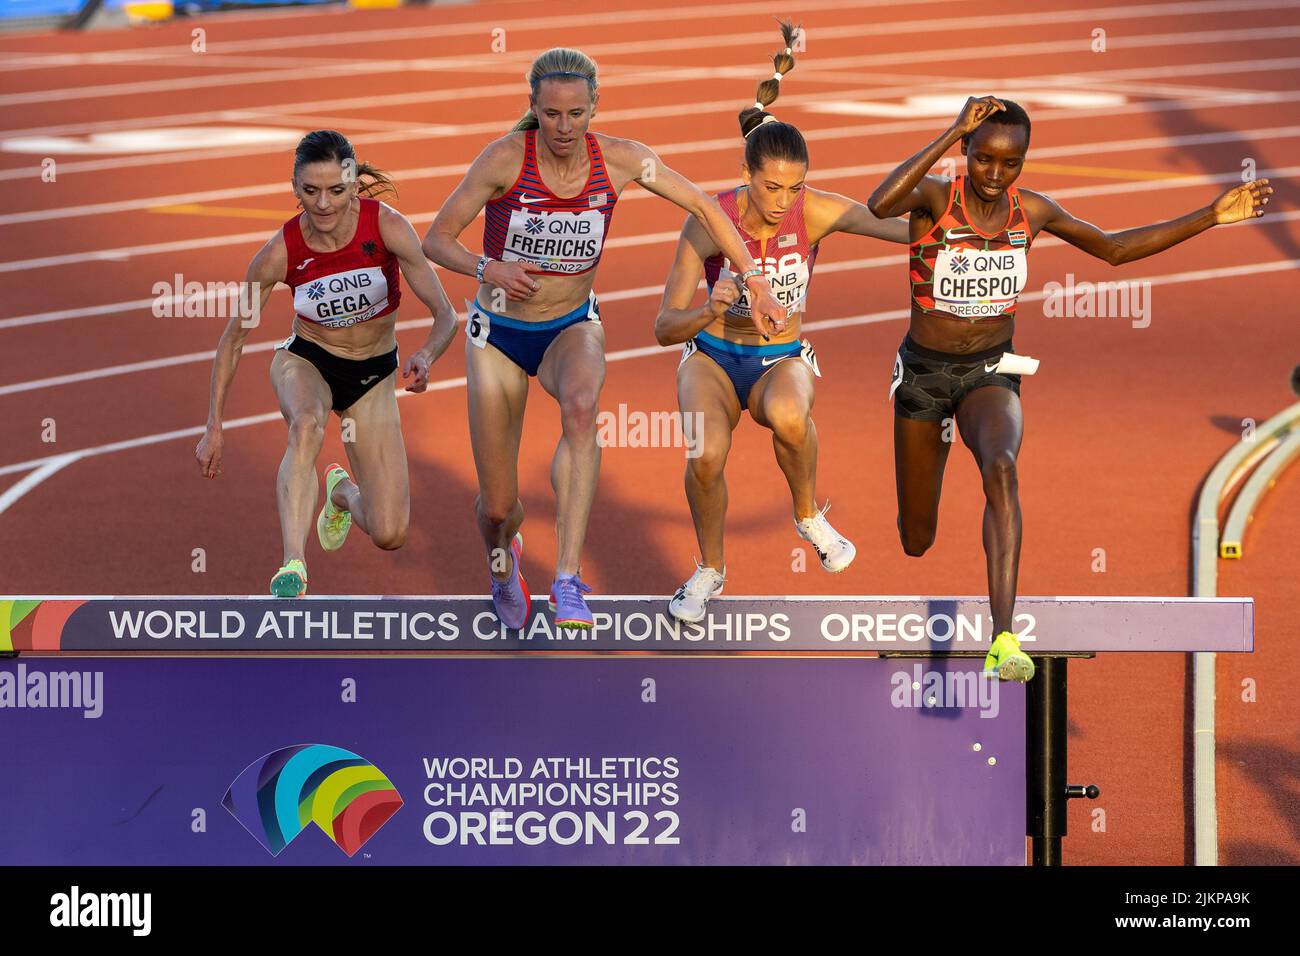 Luiza Gega (ALB), Courtney Frerichs (USA), Courtney Wayment (USA), and Celliphine Chepteek Chespol (KEN) arrive at the water barrier in the 3000 meter Stock Photo